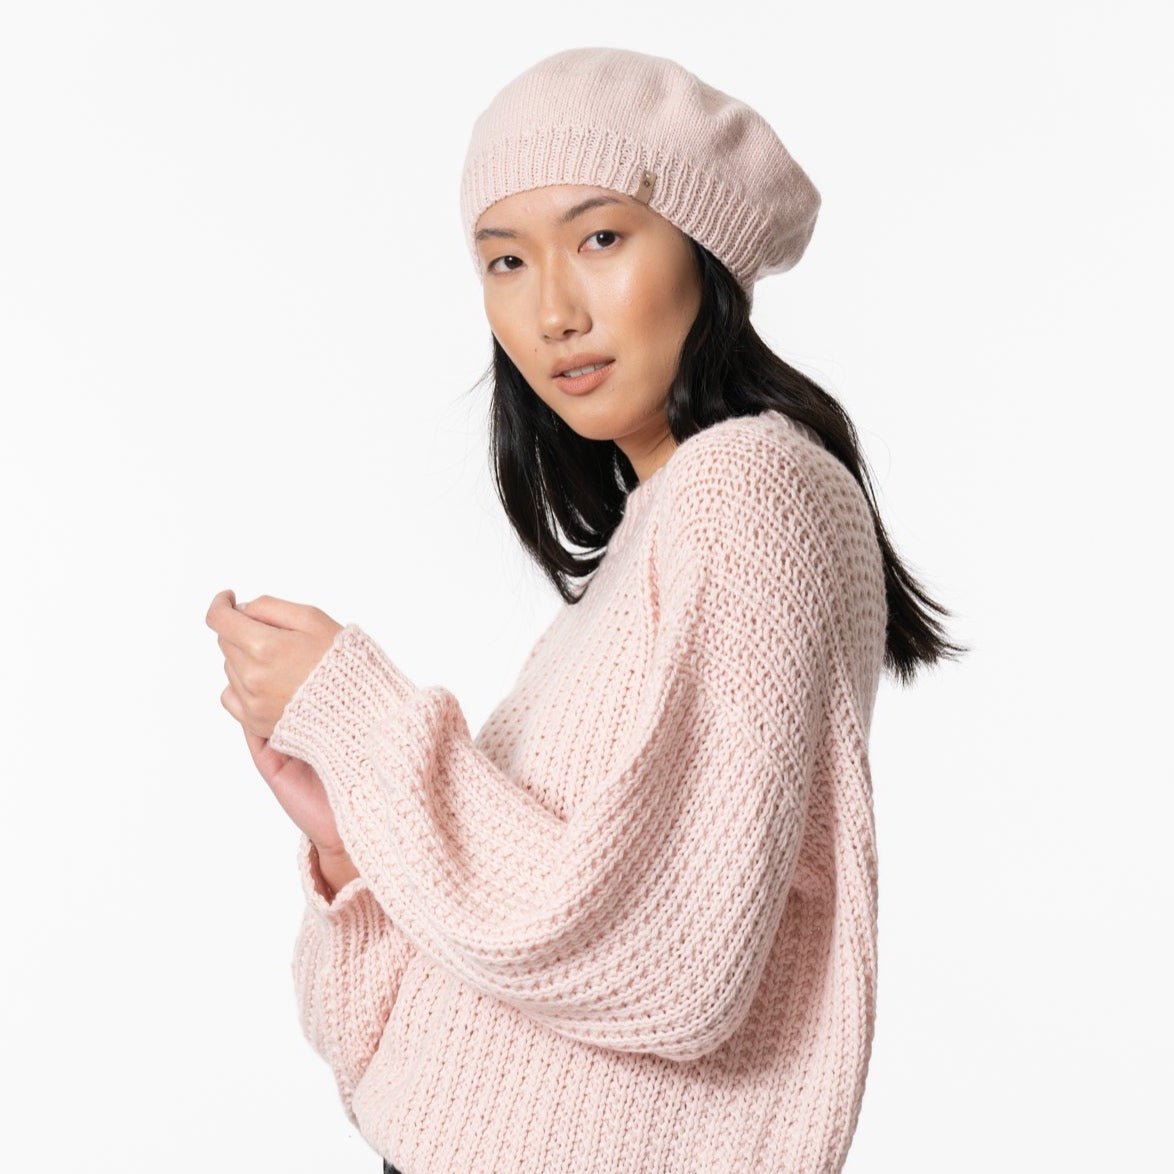 a model wears light pink beret. The Merino Handknit Beret in Blush pink is designed by Dinadi and hand knit in Nepal.